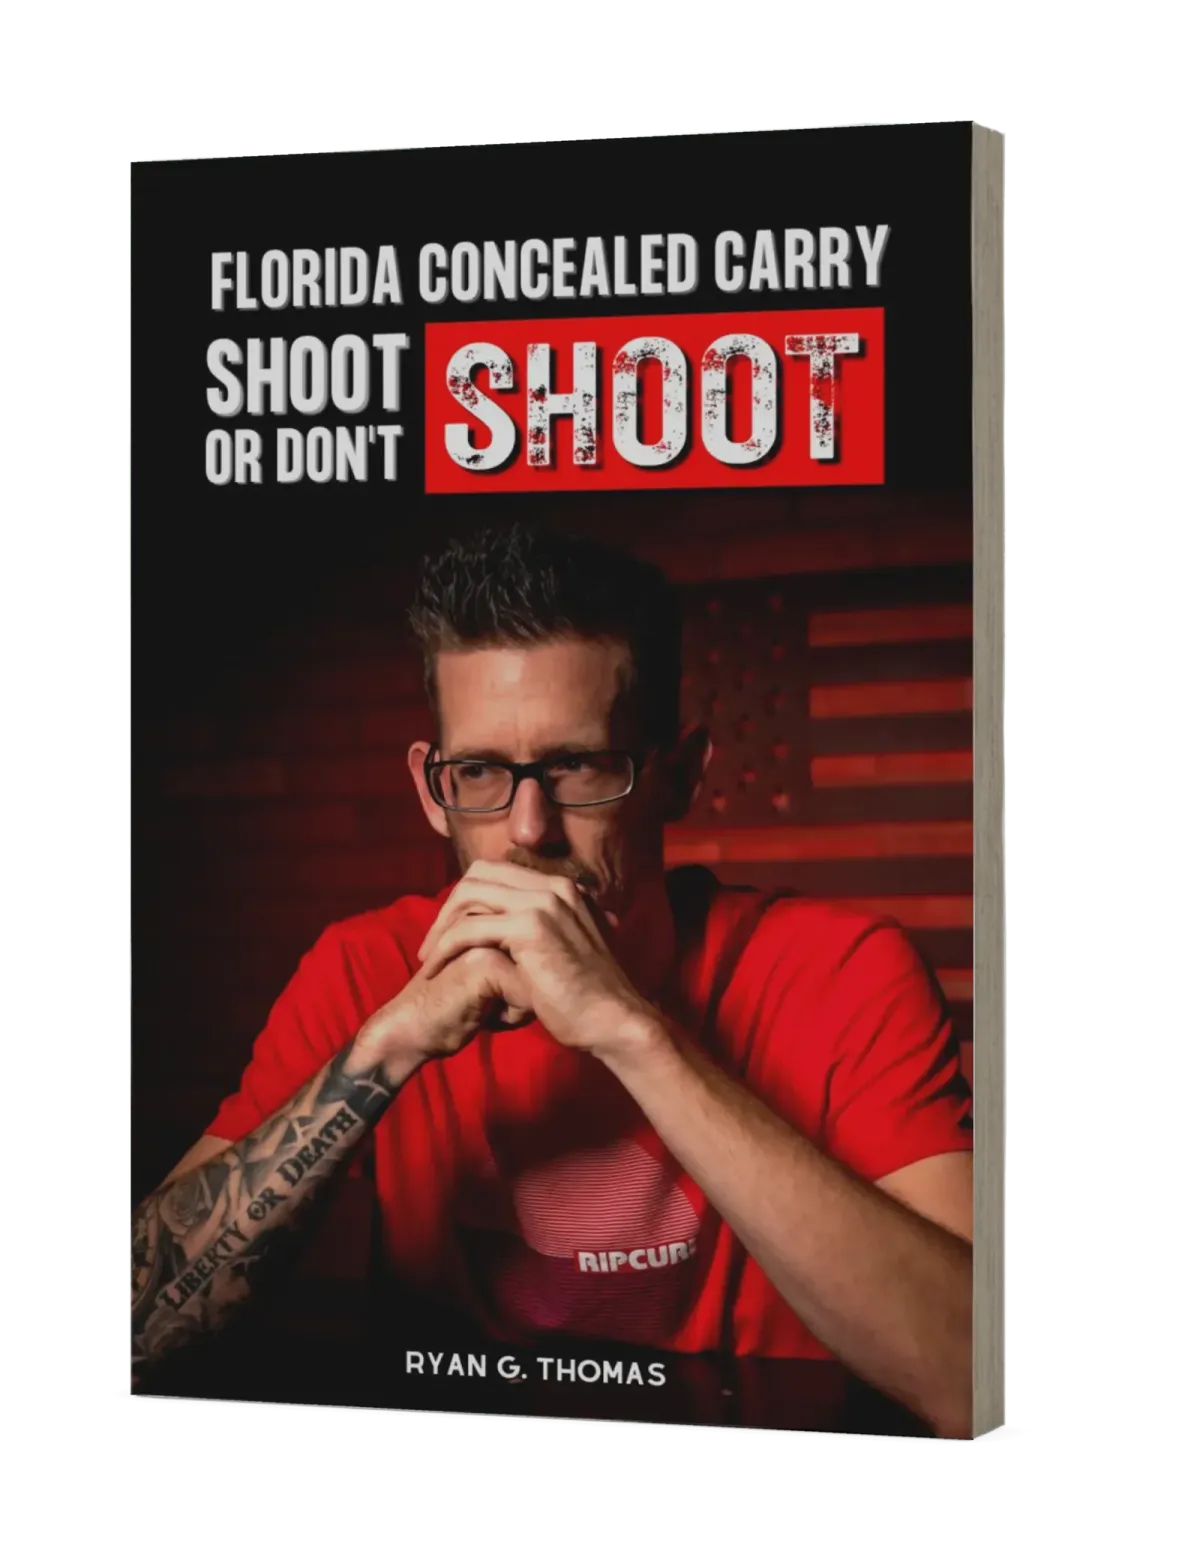 Florida Concealed Carry Shoot or Dont Shoot Book cover